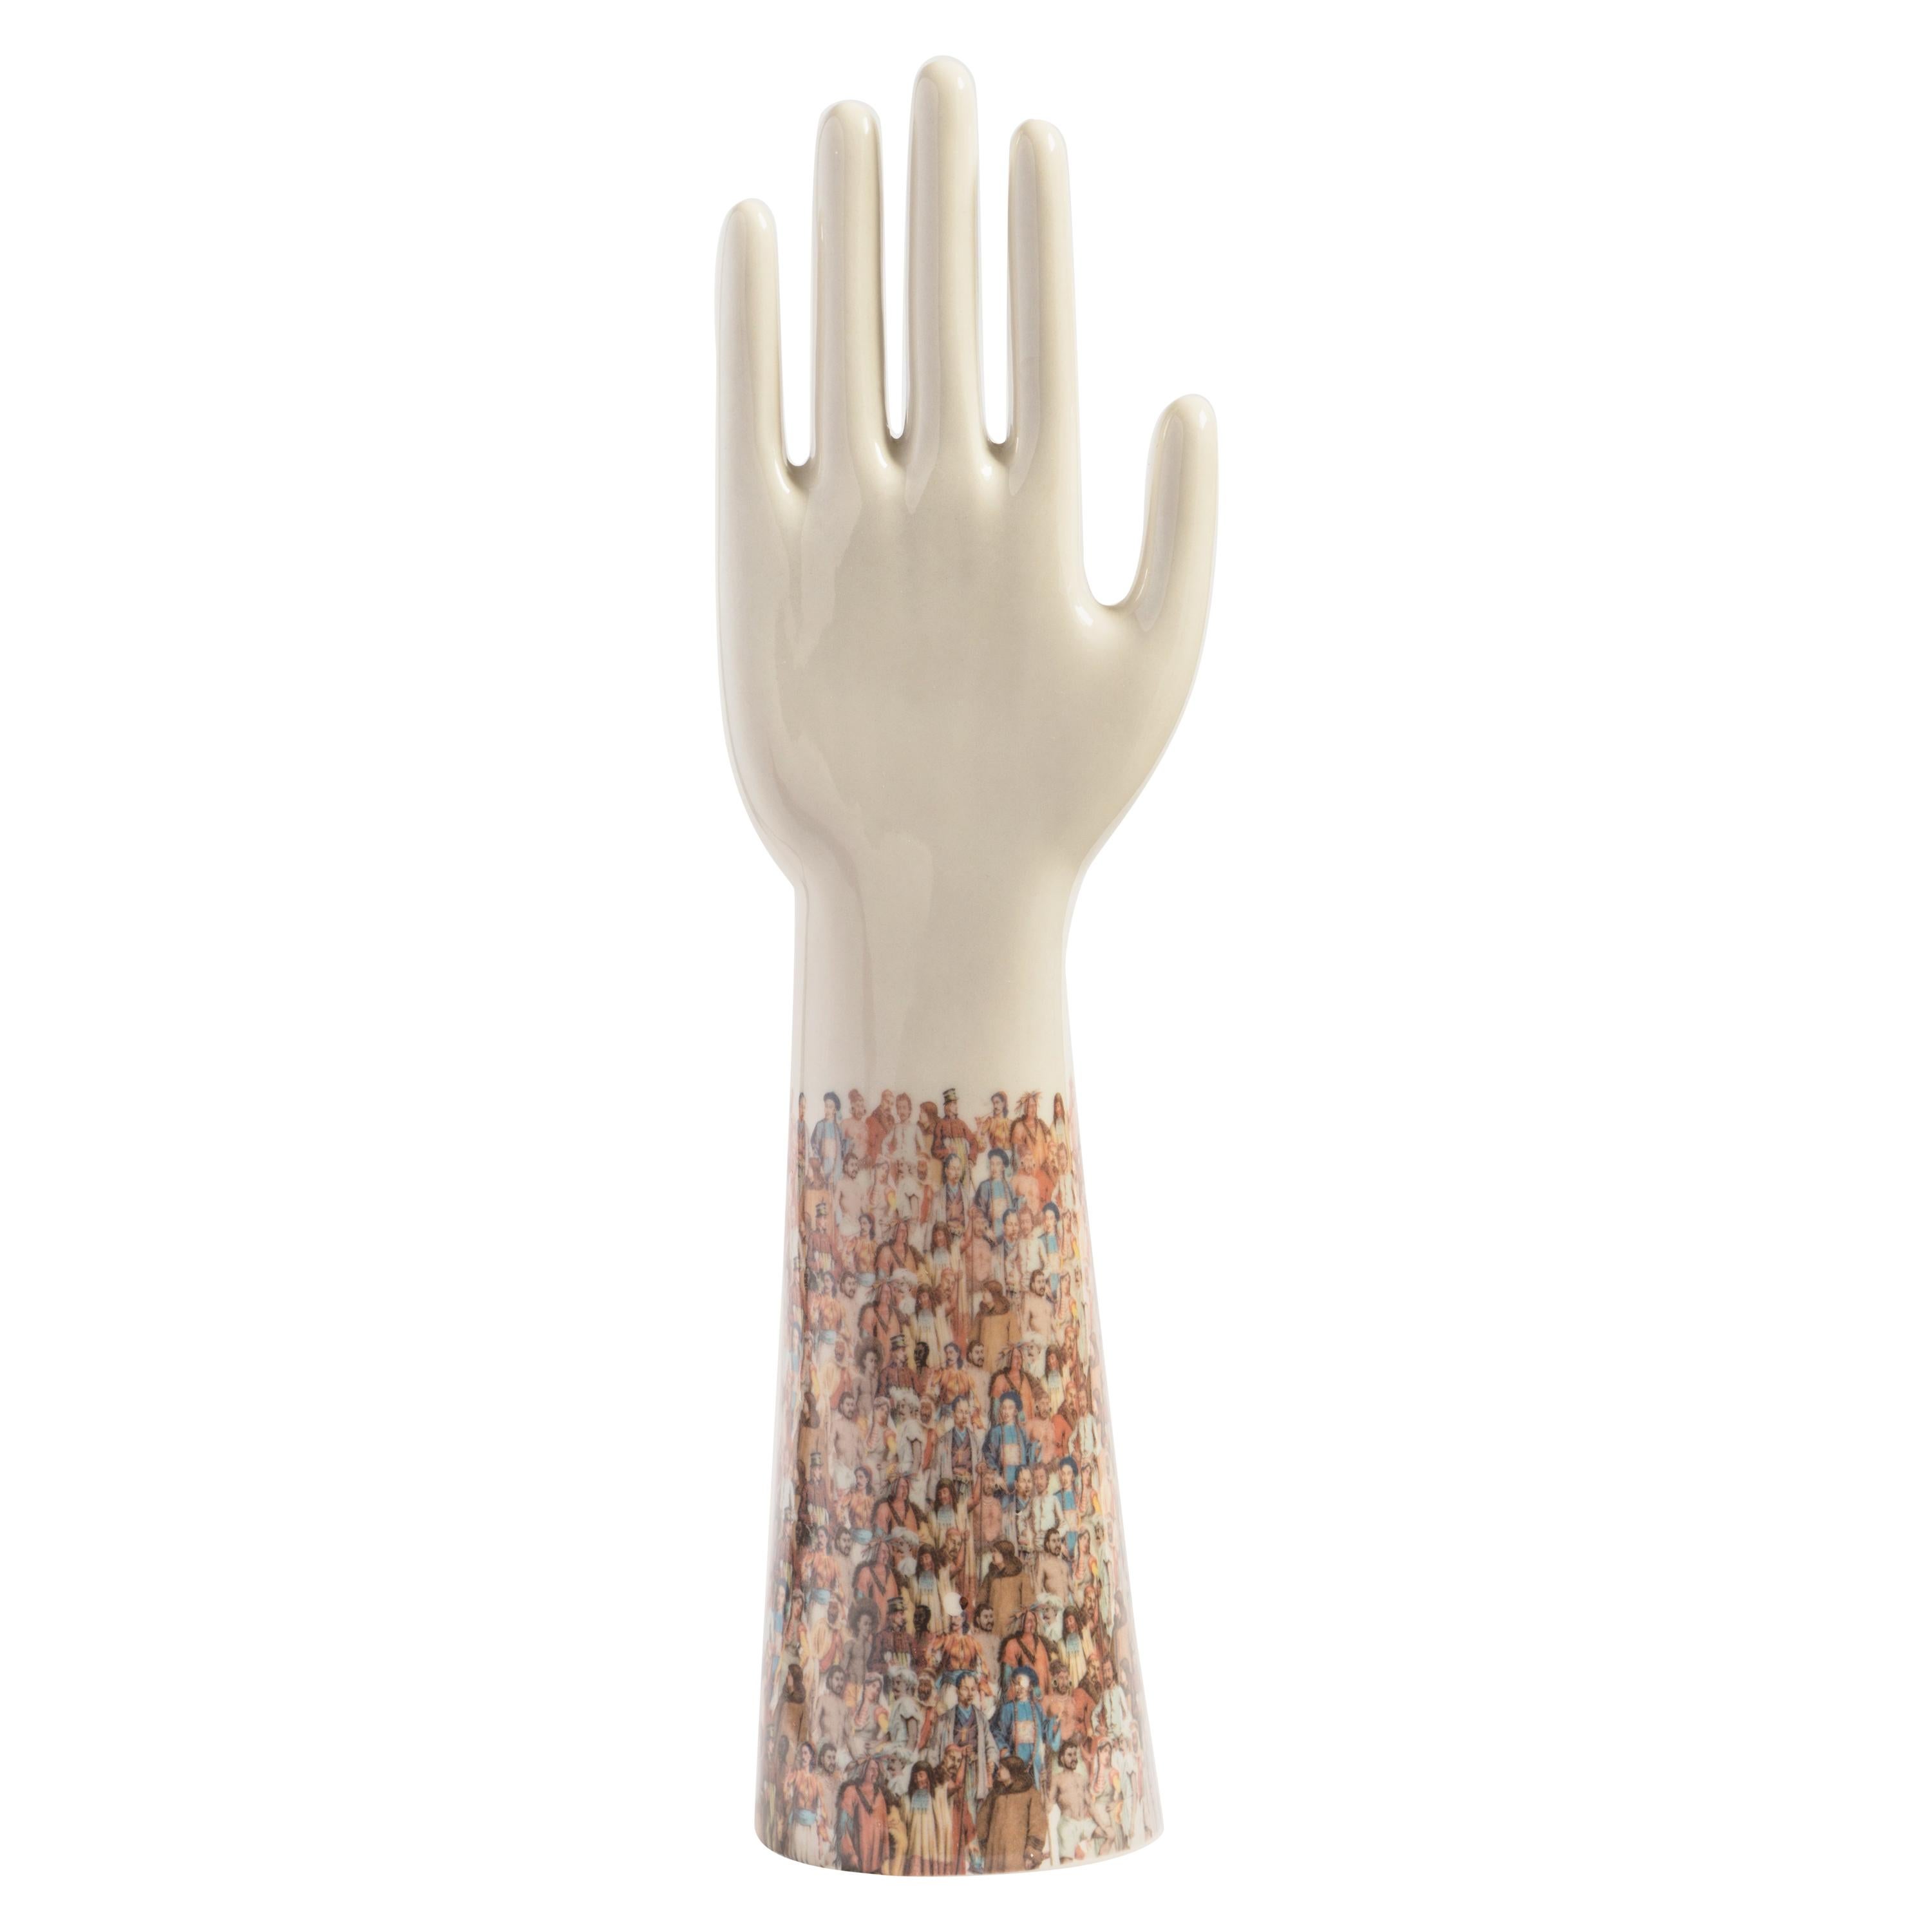 Italian Porcelain Anatomica the Hand, 1990s Human Being Decoration by Vito Nesta For Sale